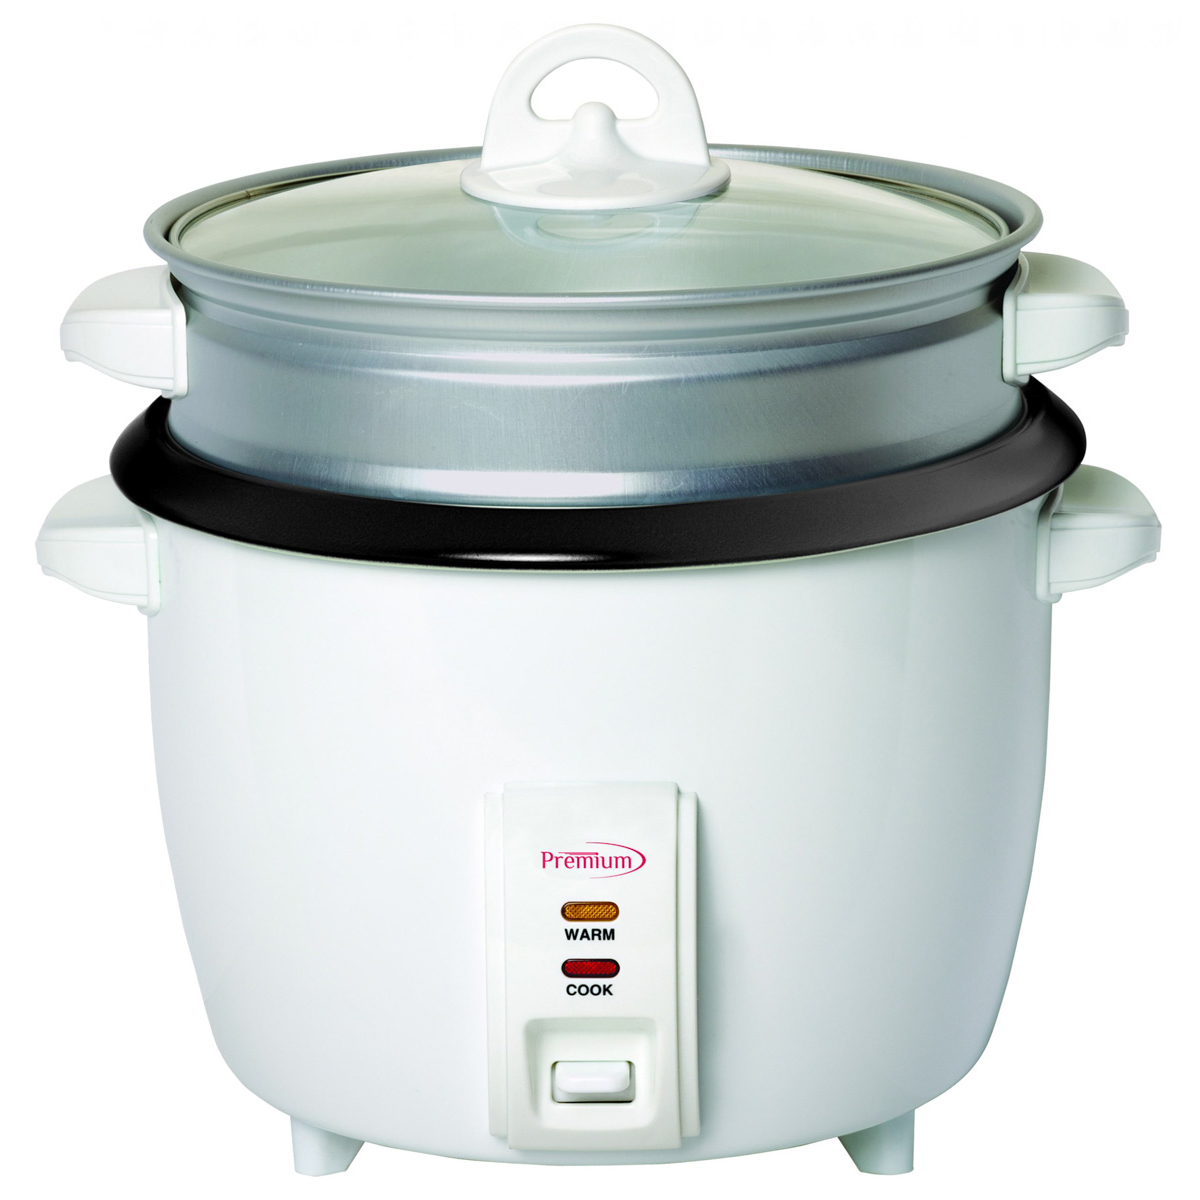 15/30 Cup Rice Cooker and Steamer – DOMINION